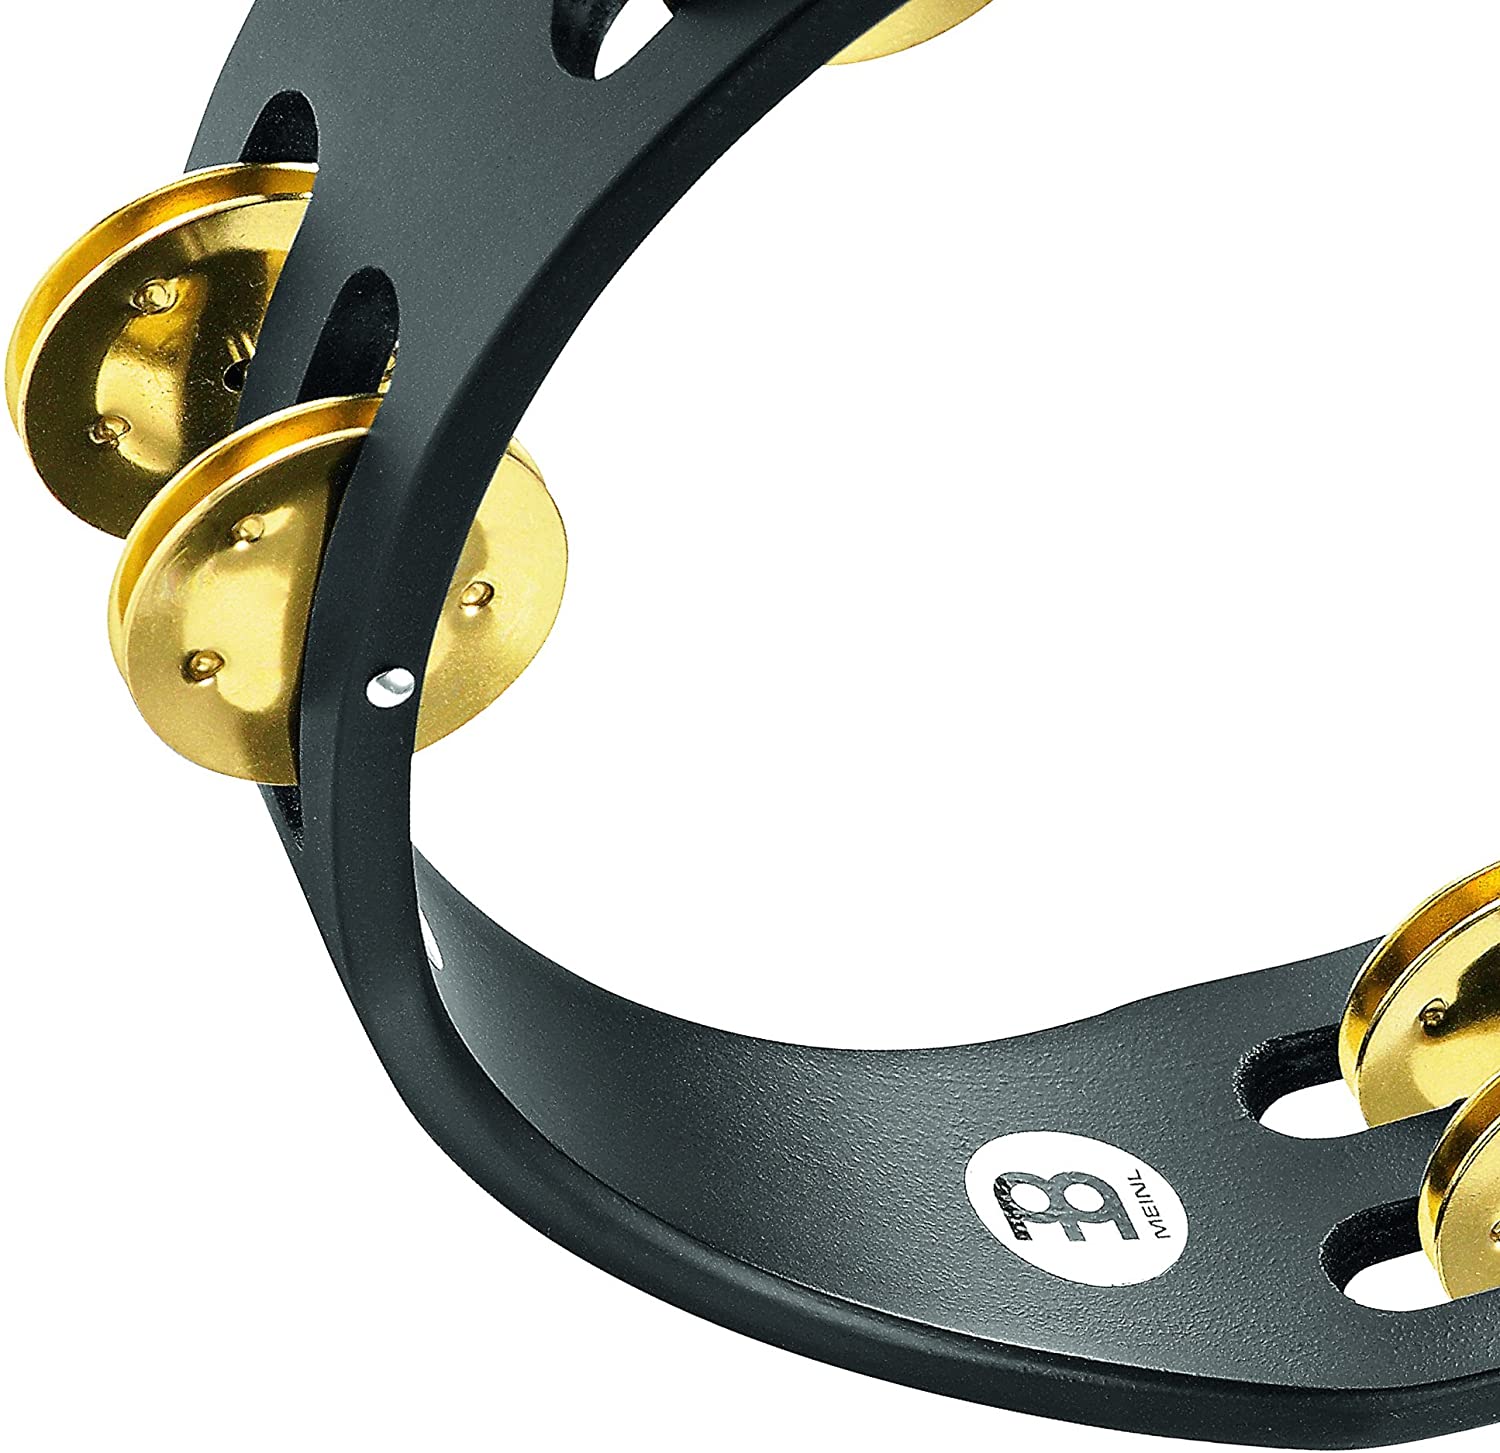 Meinl Percussion Compact Wood Tambourine with Solid Brass Jingles